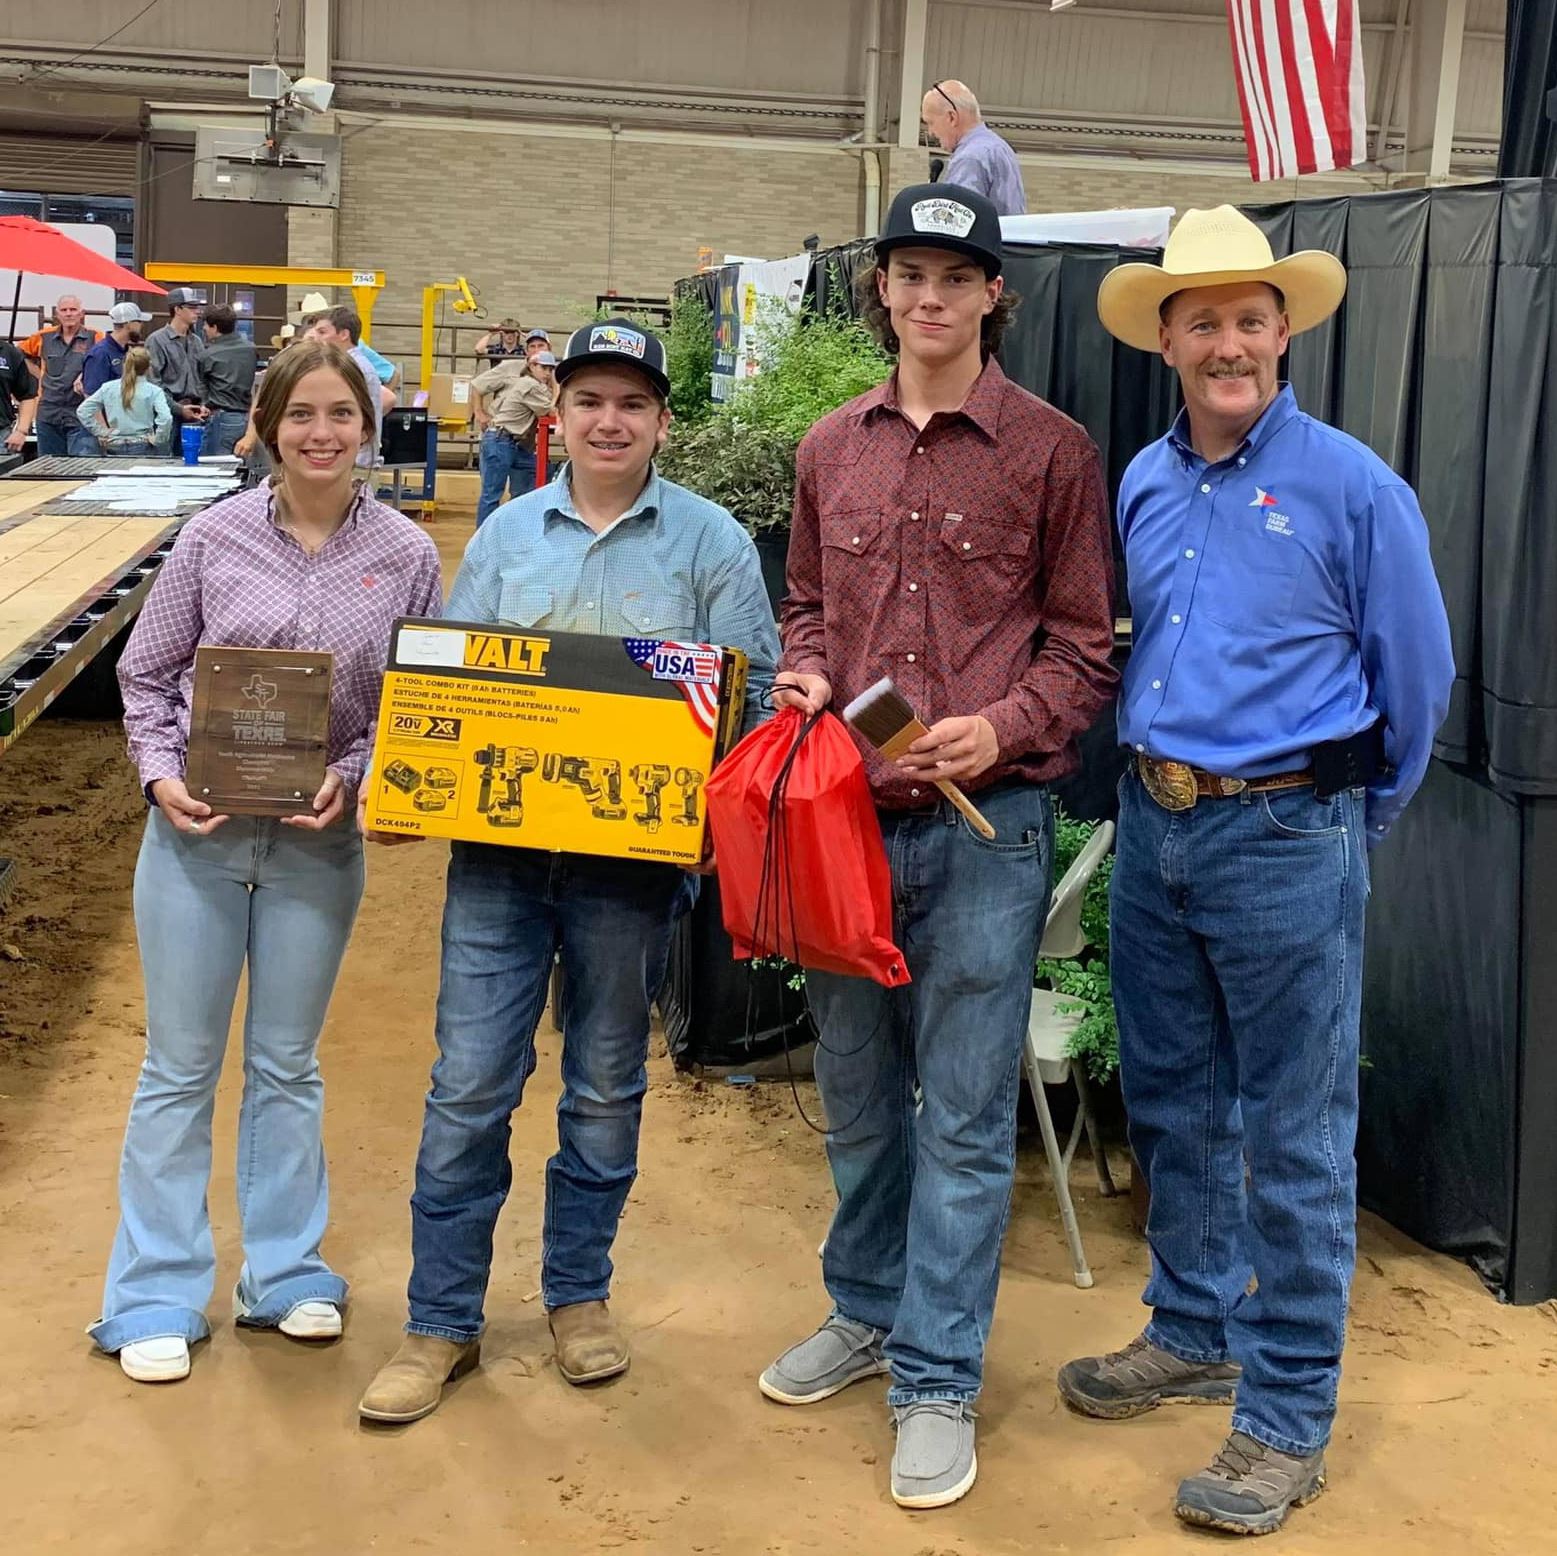  Greenville High School students score big at the Texas State Fair!